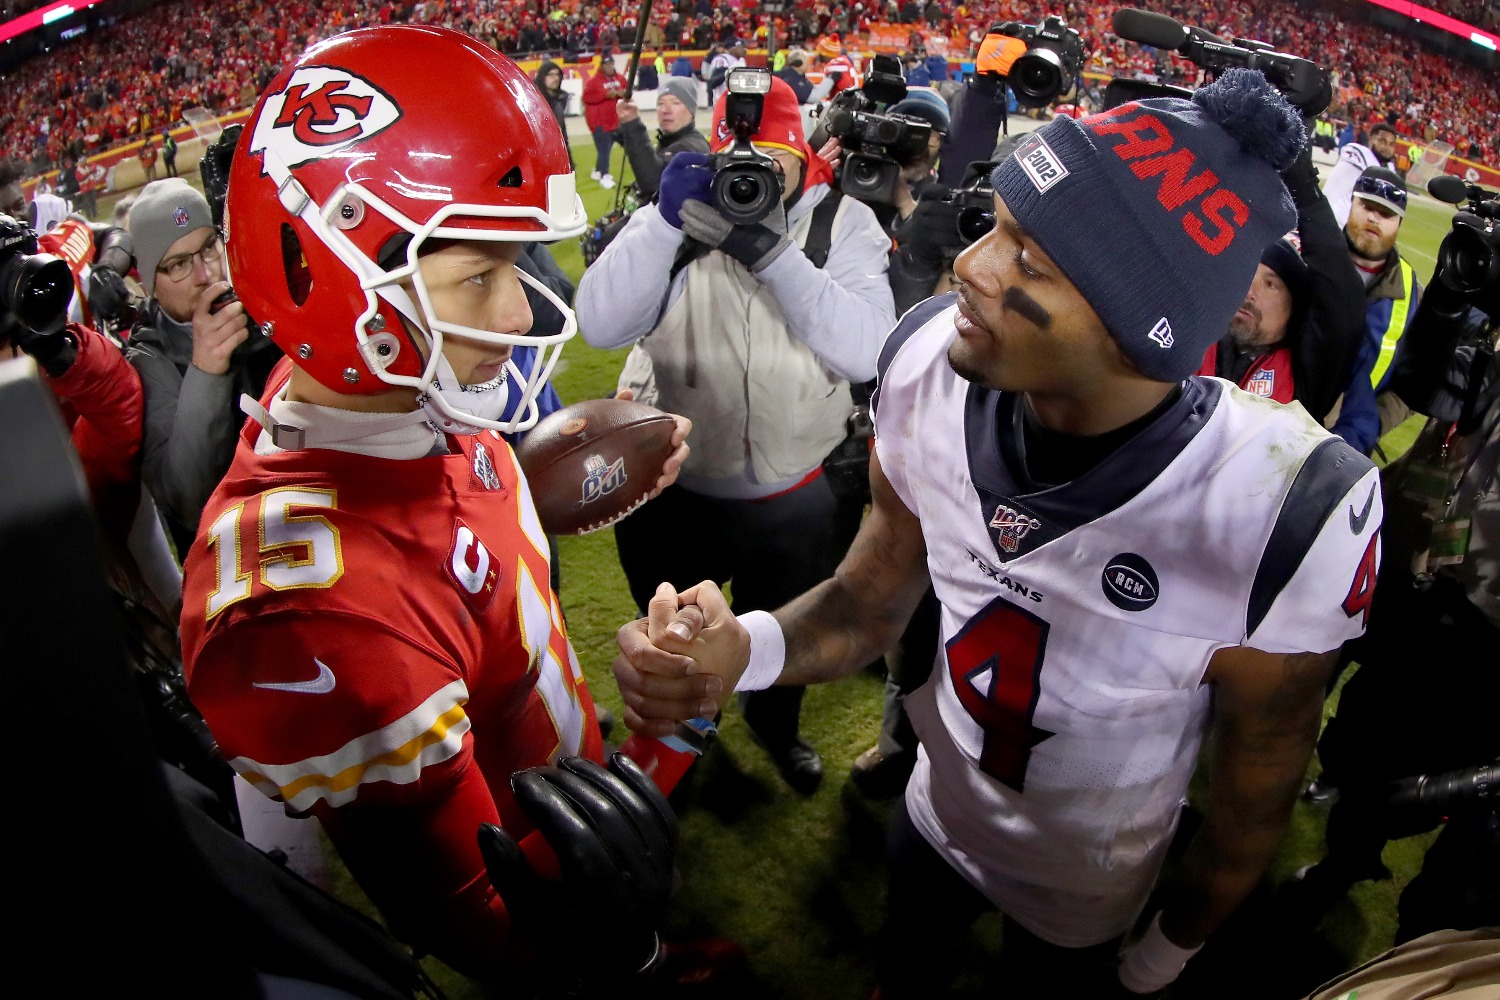 Deshaun Watson desperately needs the Texans to hire Chiefs OC Eric Bieniemy, who has helped Patrick Mahomes quickly develop into a star.